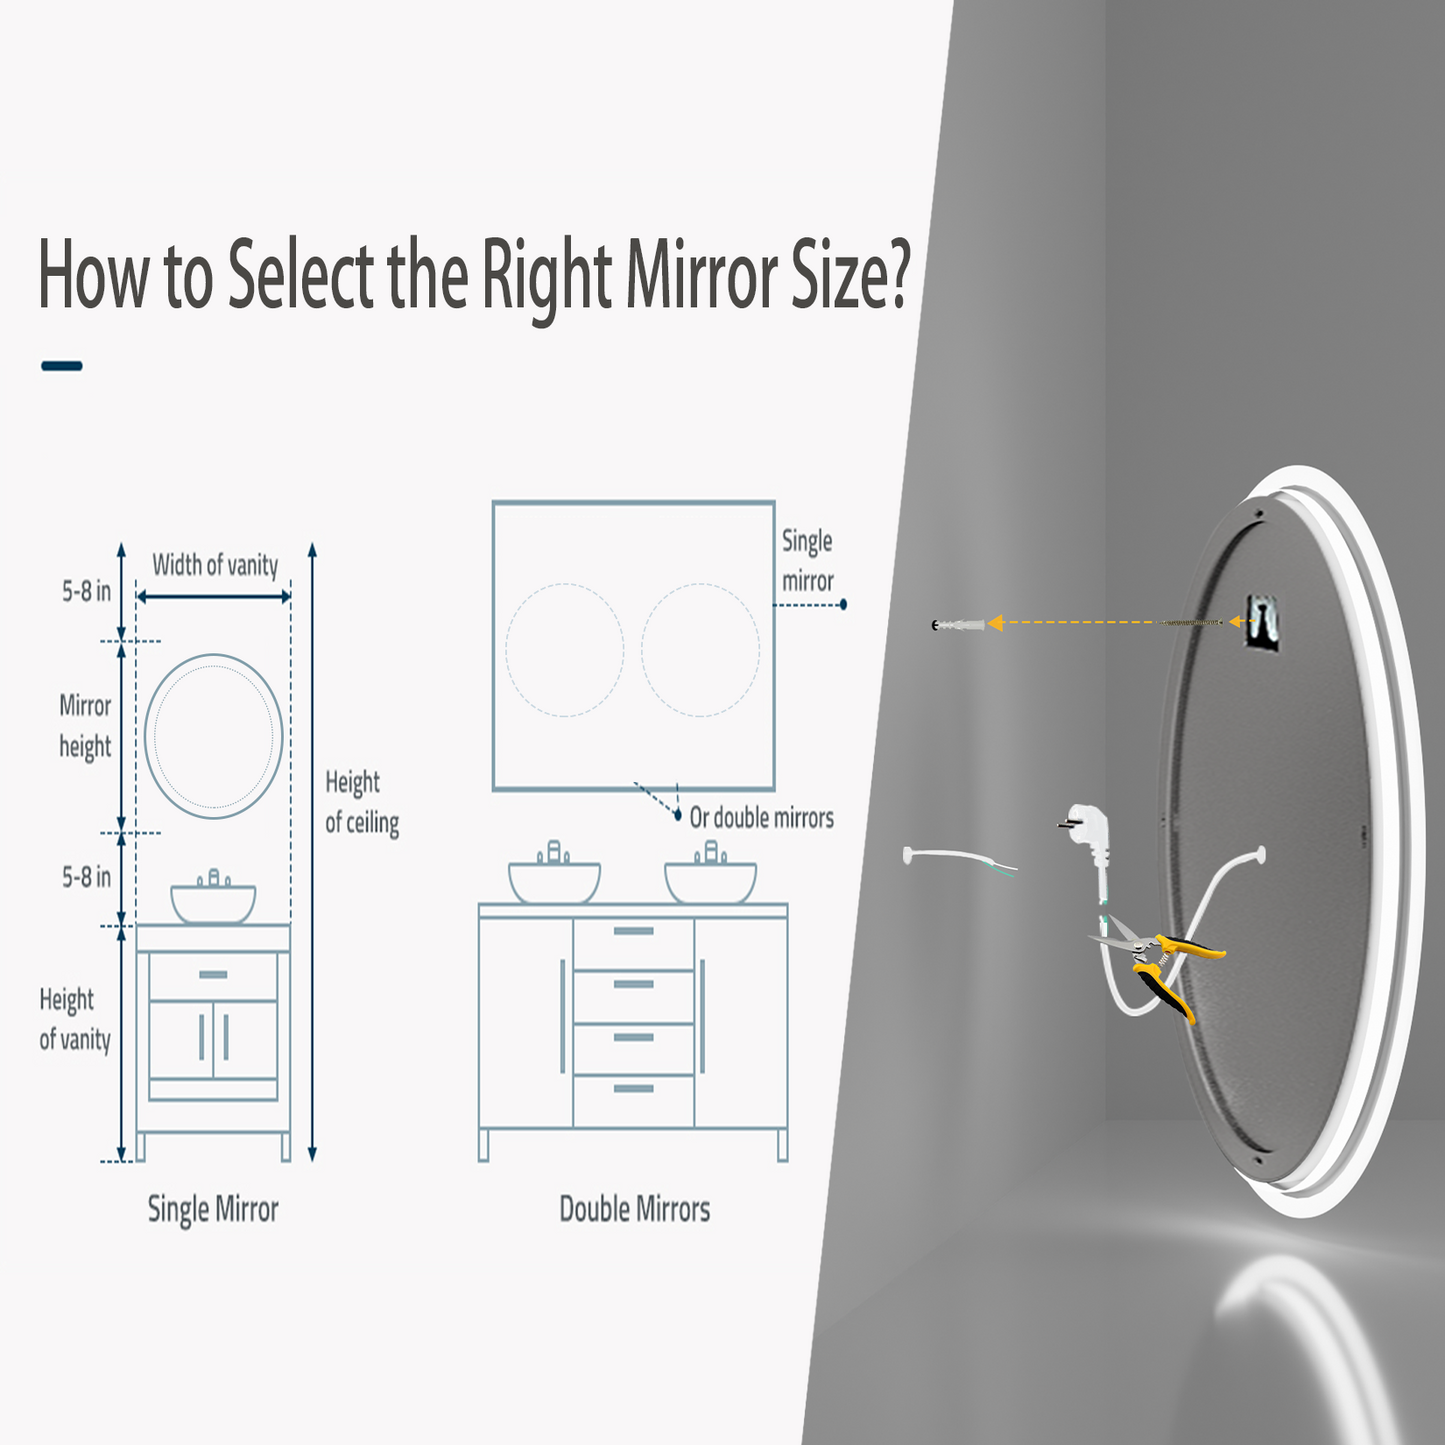 Dimmable Round Led Bathroom Mirror